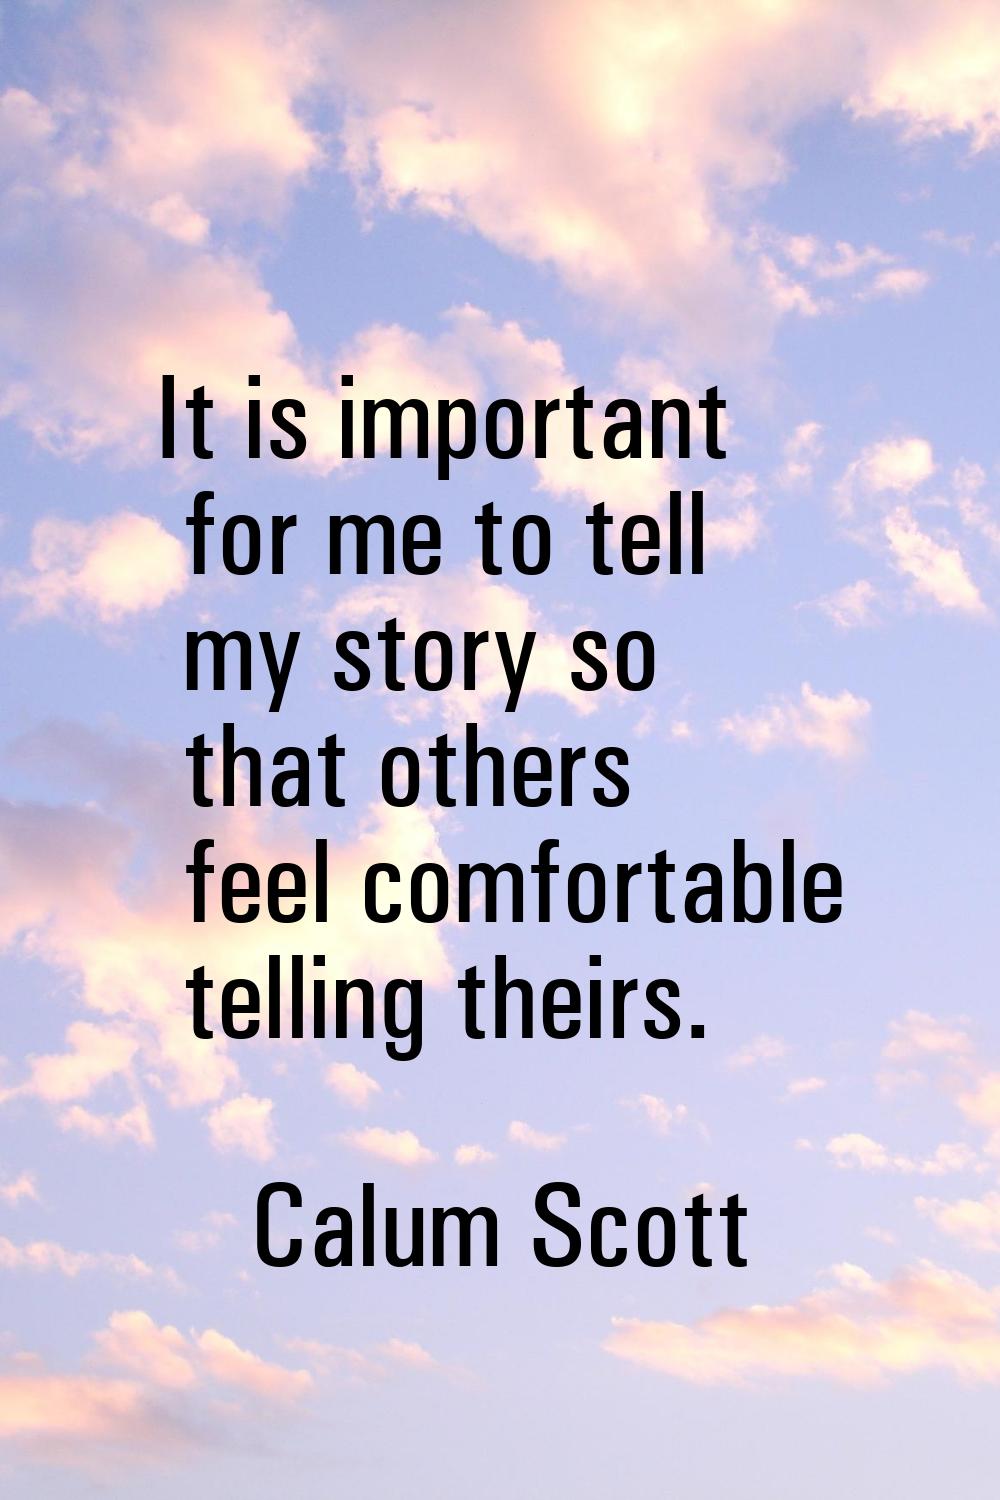 It is important for me to tell my story so that others feel comfortable telling theirs.